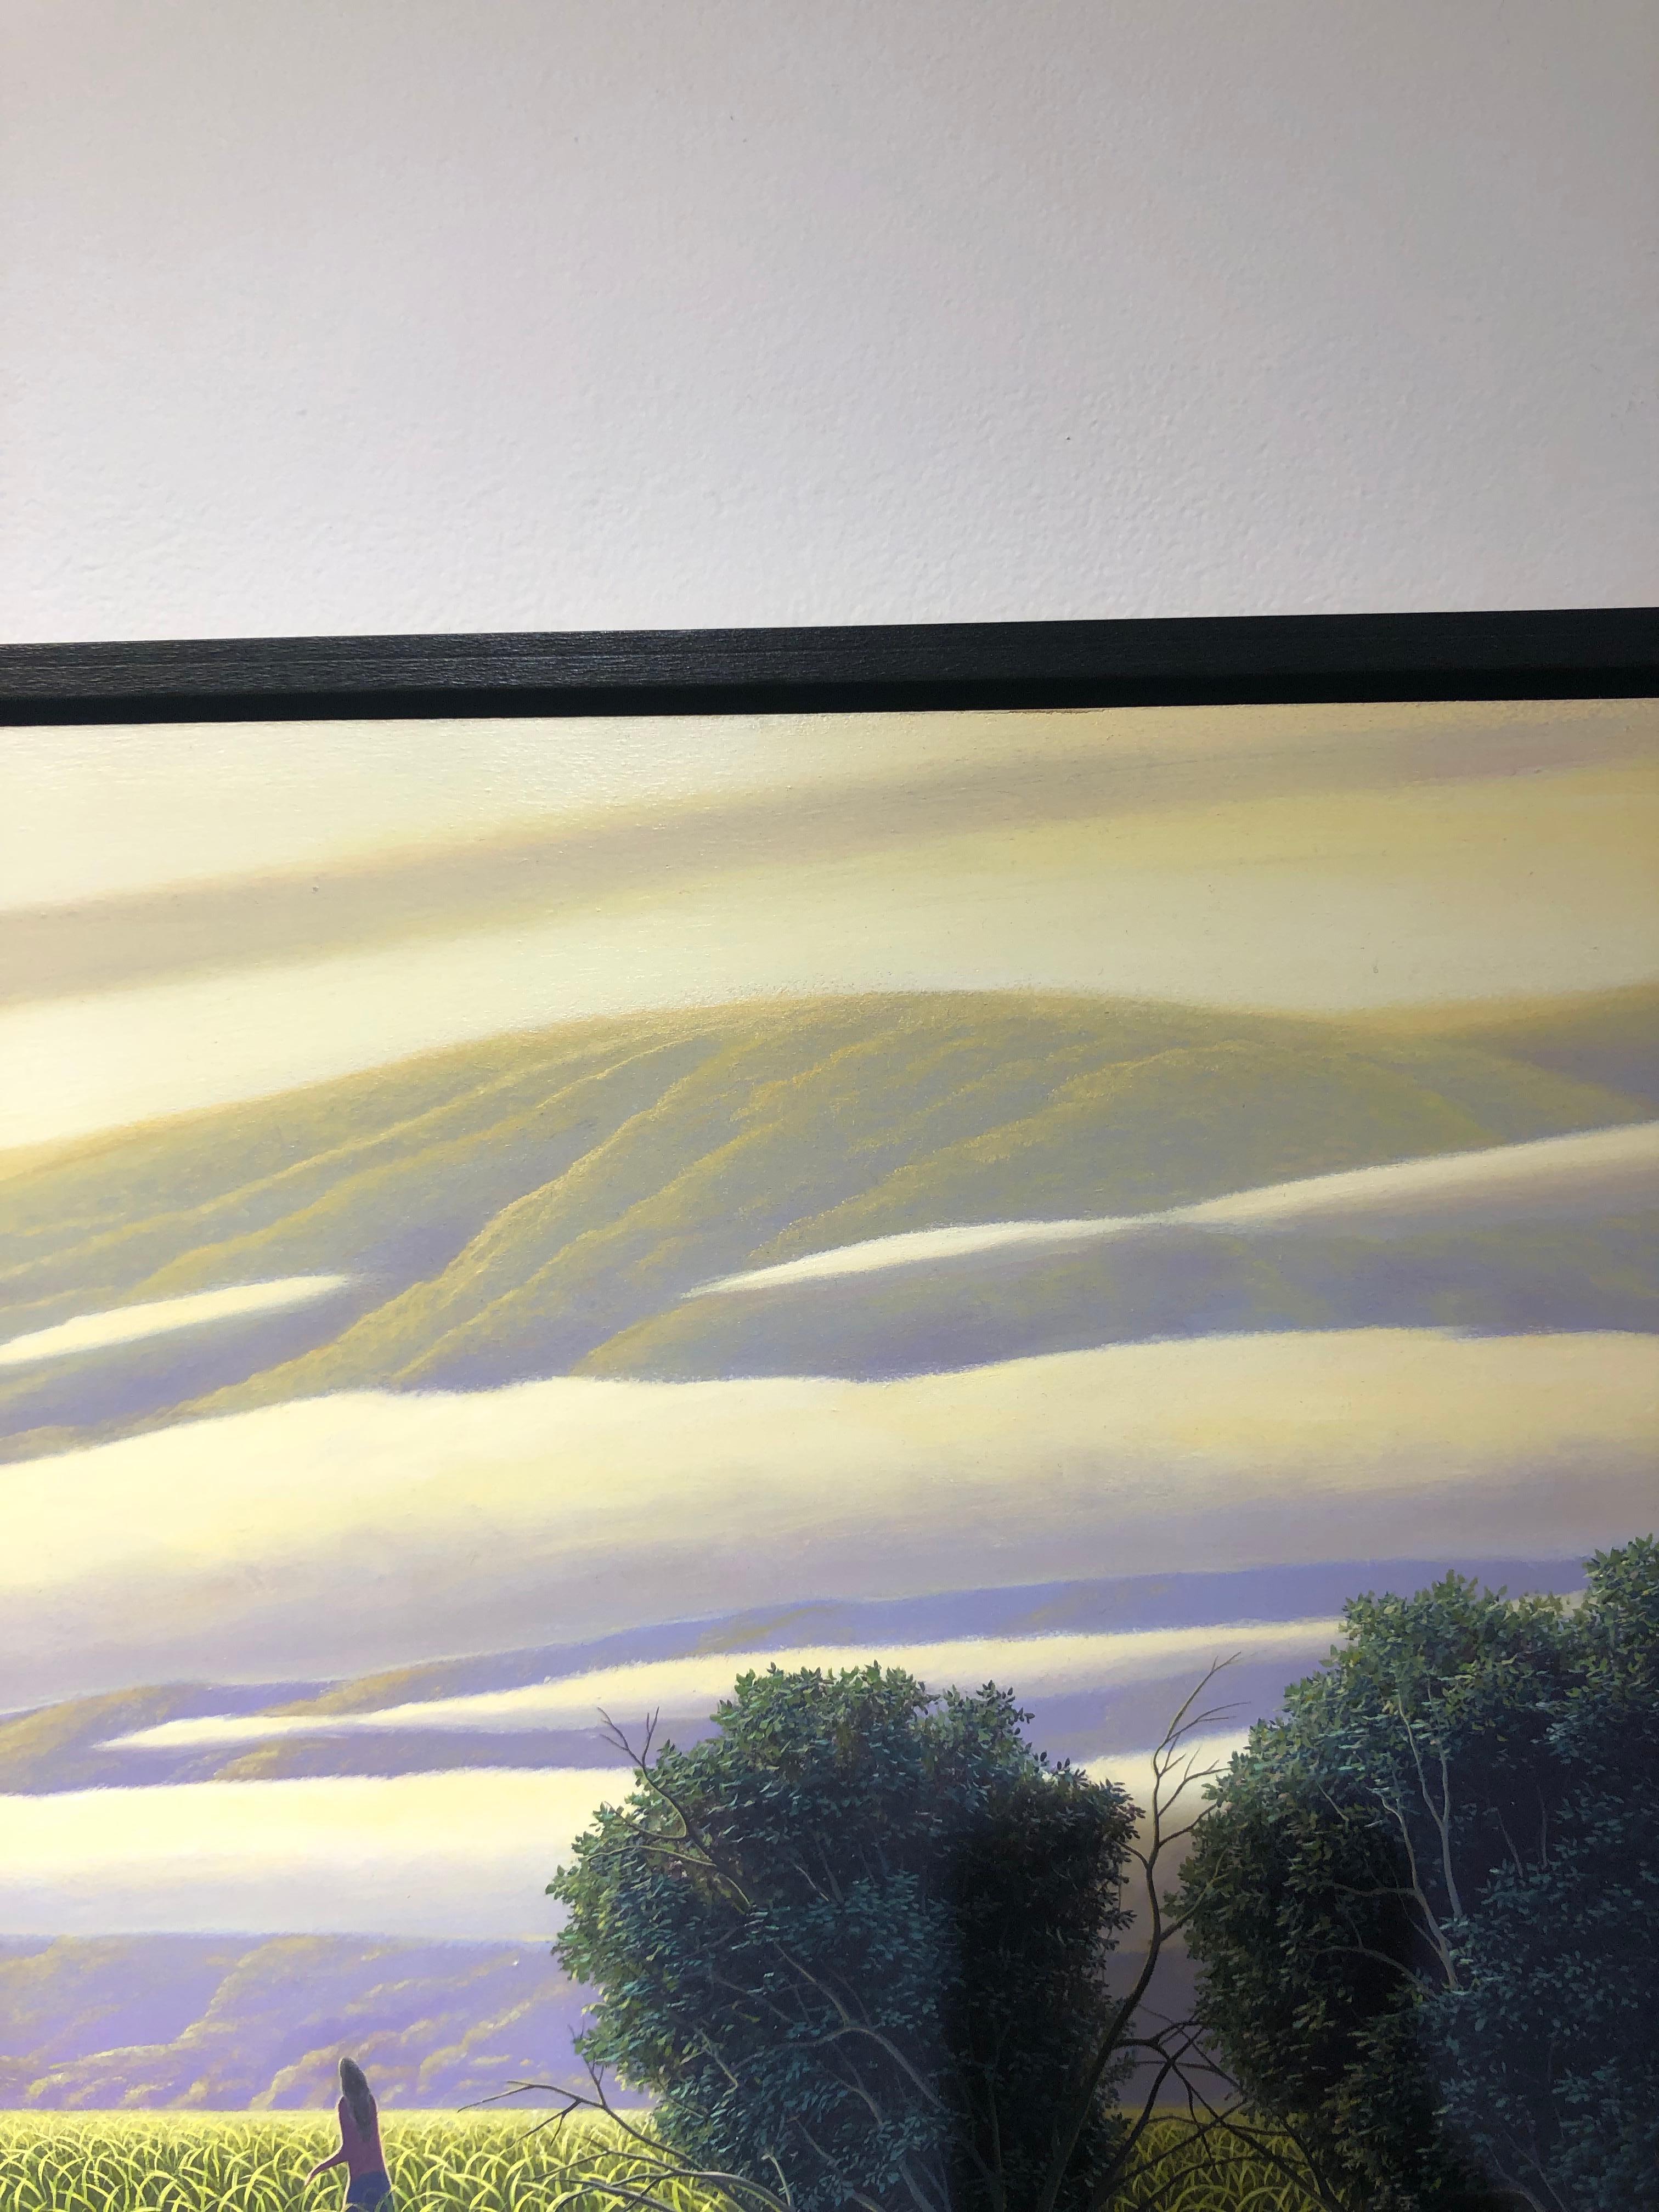 The Perfect Evening - Original Oil Painting of Figure in a Surreal Landscape 7